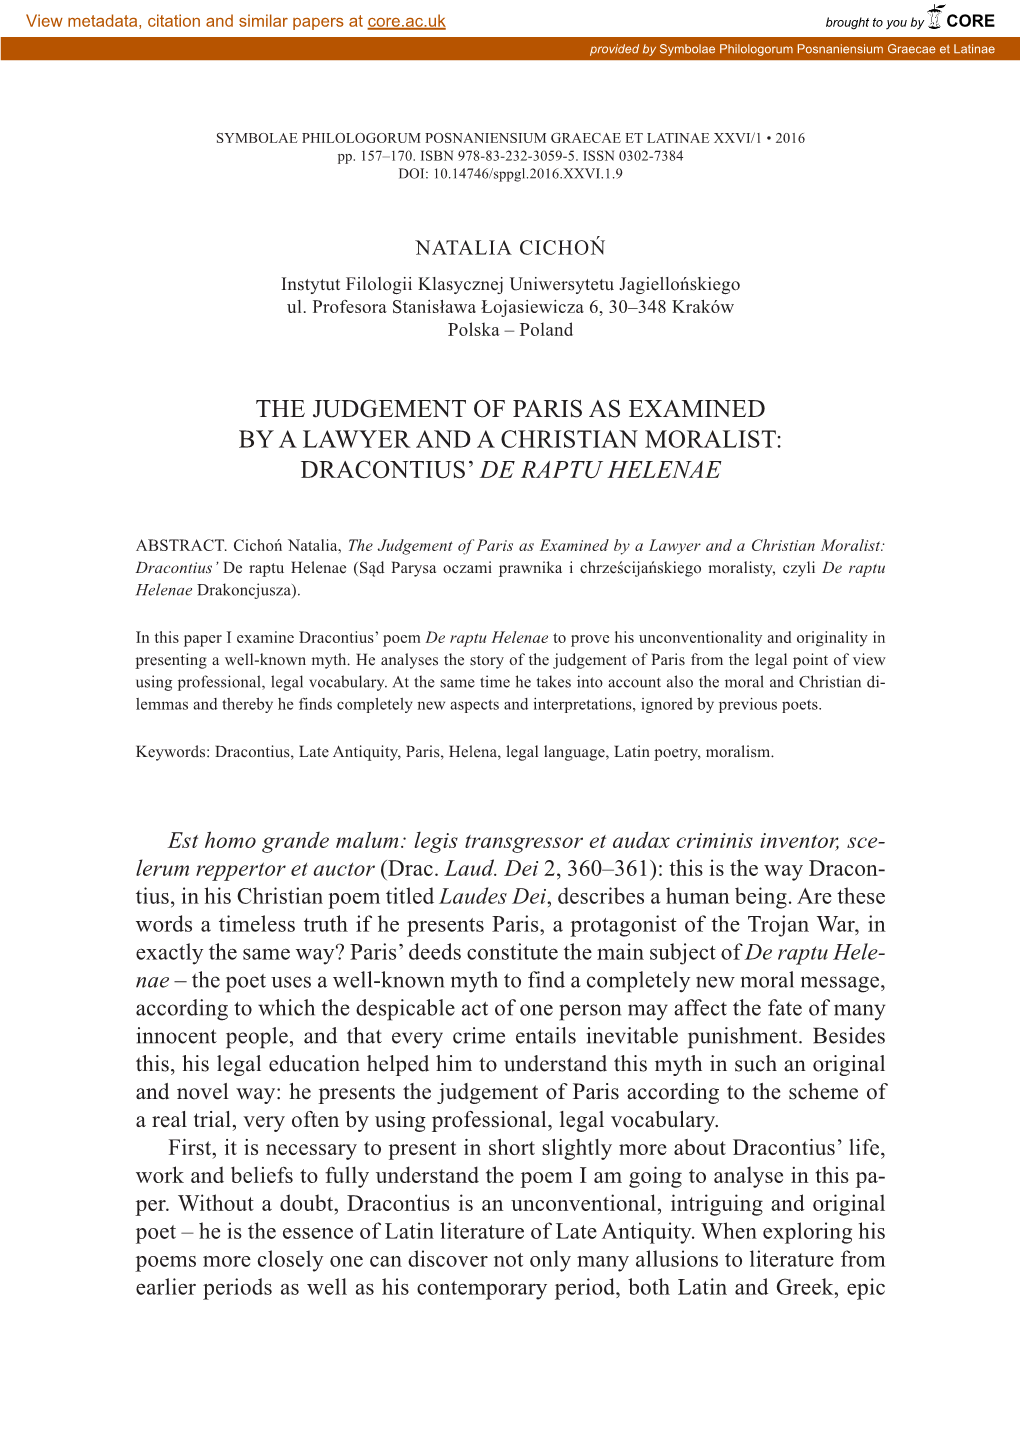 The Judgement of Paris As Examined by a Lawyer and a Christian Moralist: Dracontius’ De Raptu Helenae